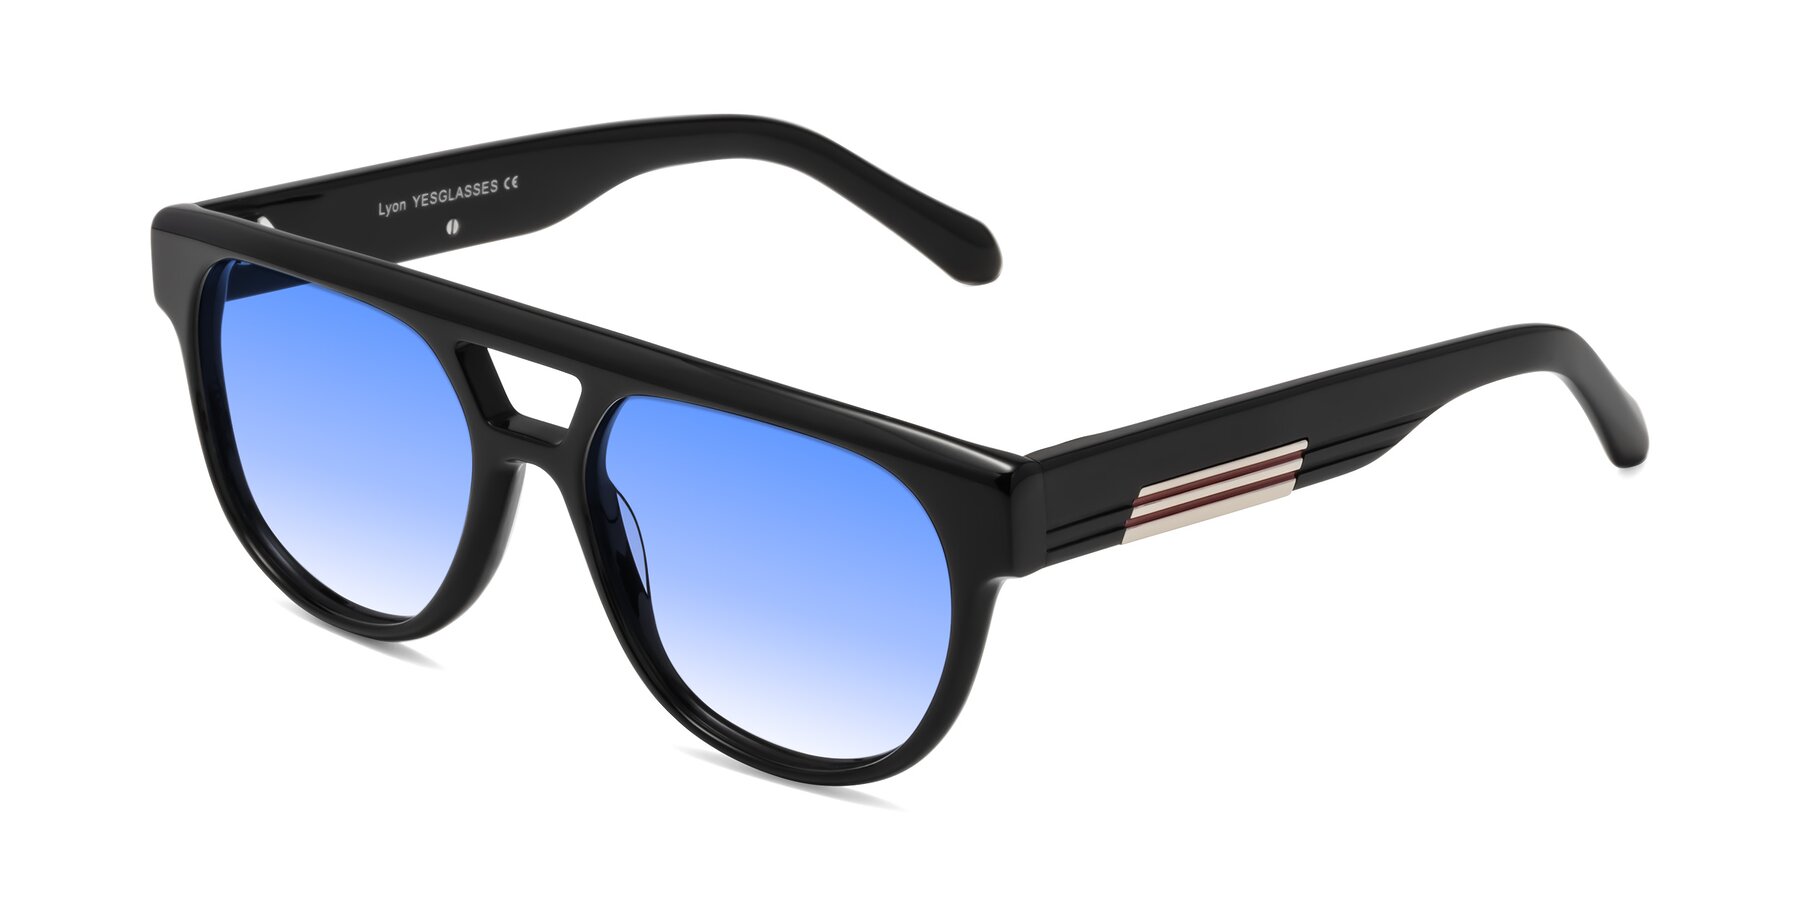 Angle of Lyon in Black with Blue Gradient Lenses